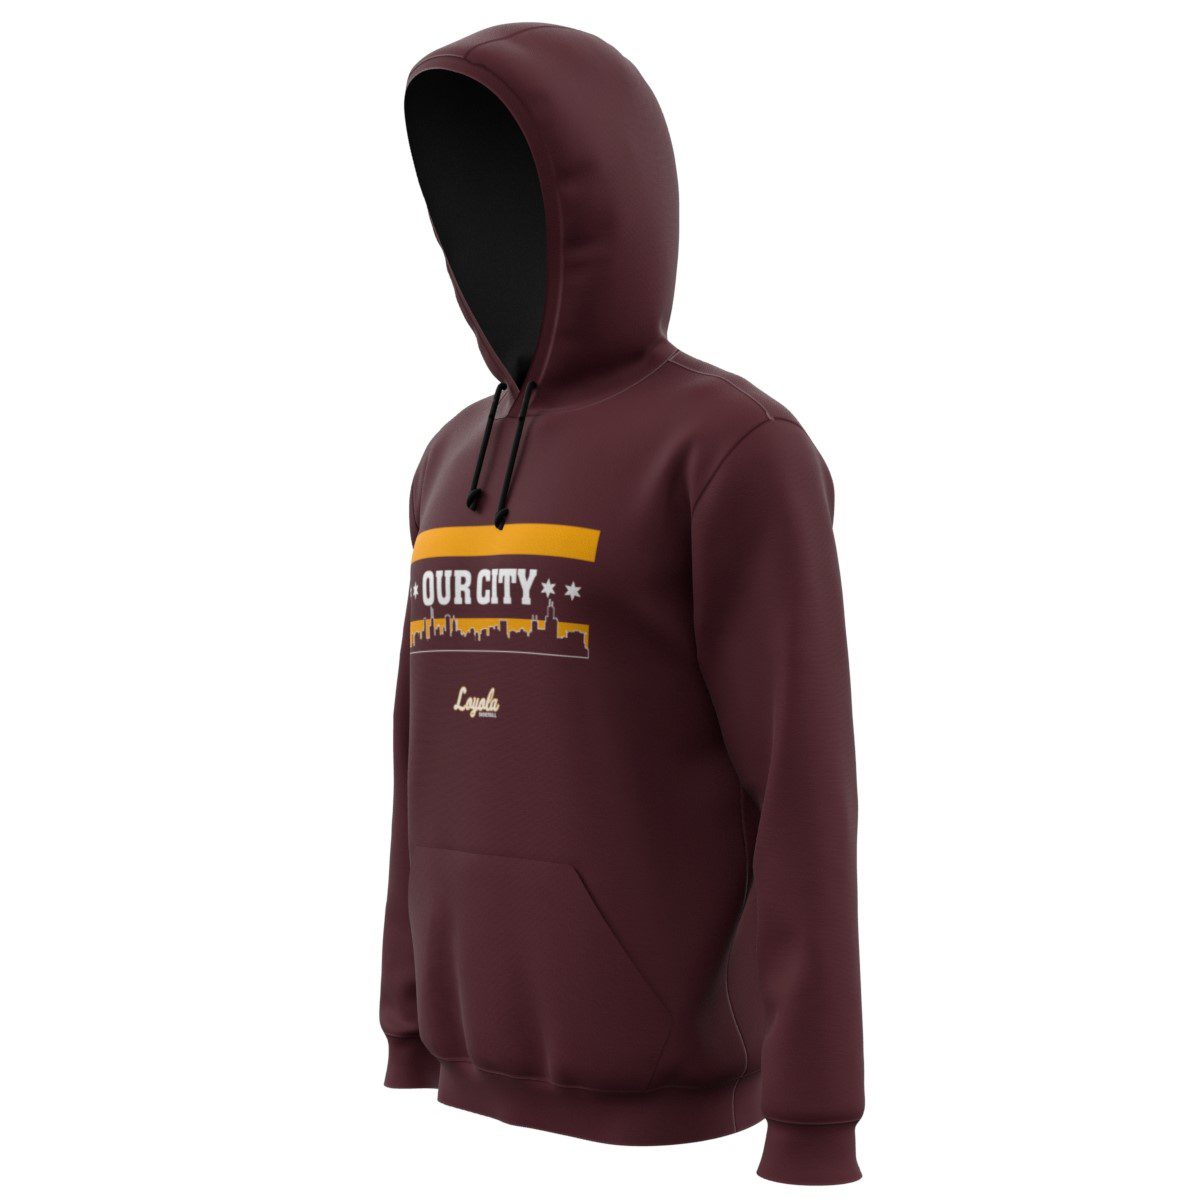 Loyola Our City Hoodie Side